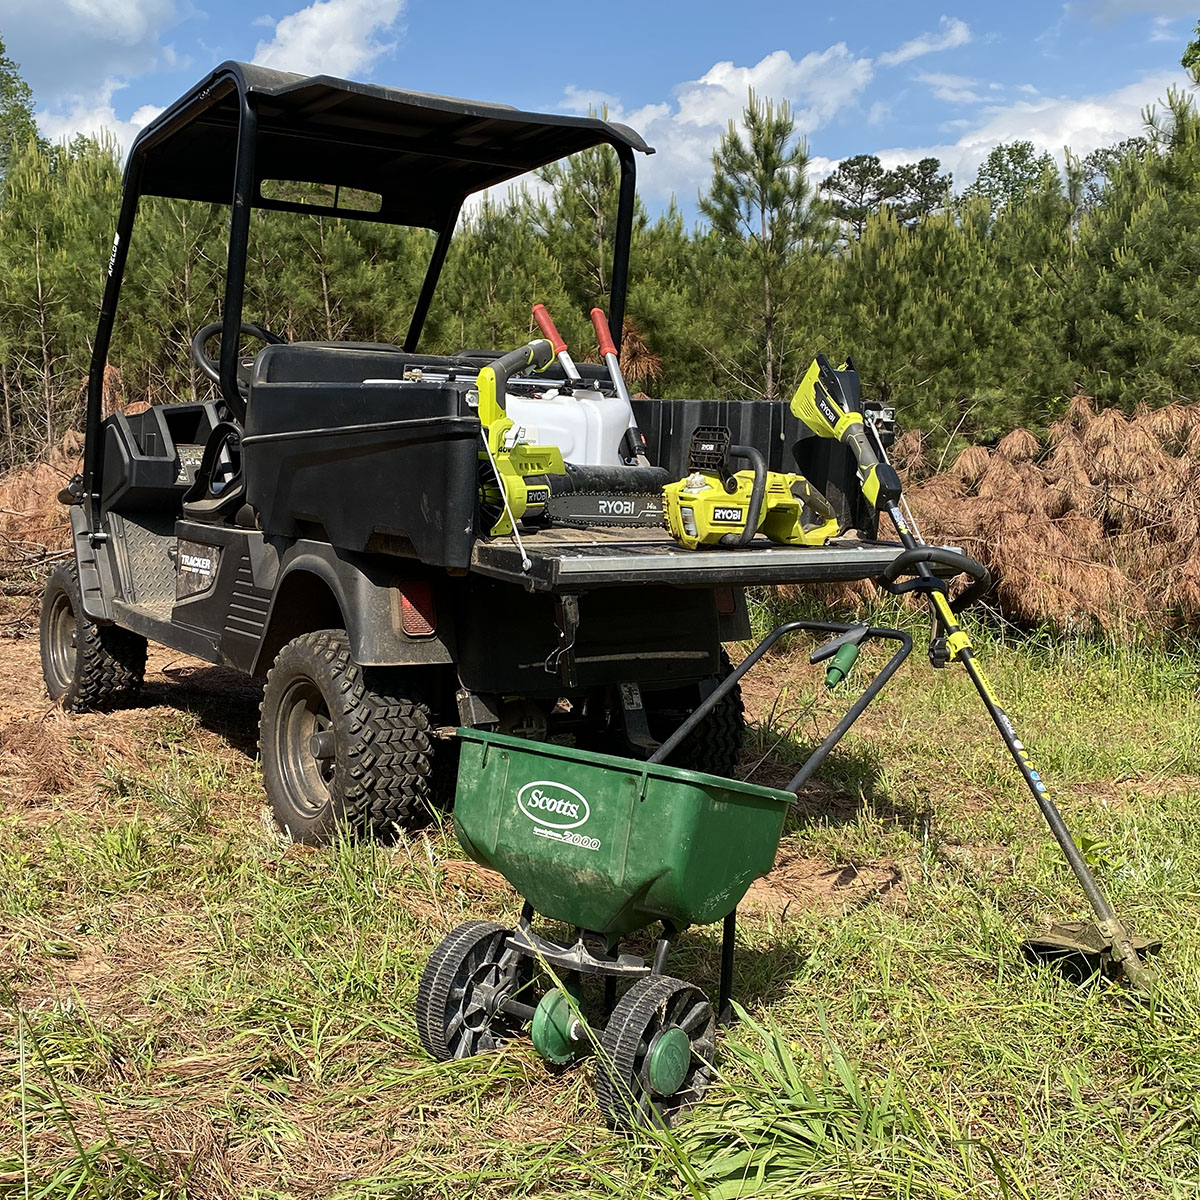 A Tracker utility vehicle loaded with hand tools used to manage a small hunting property.